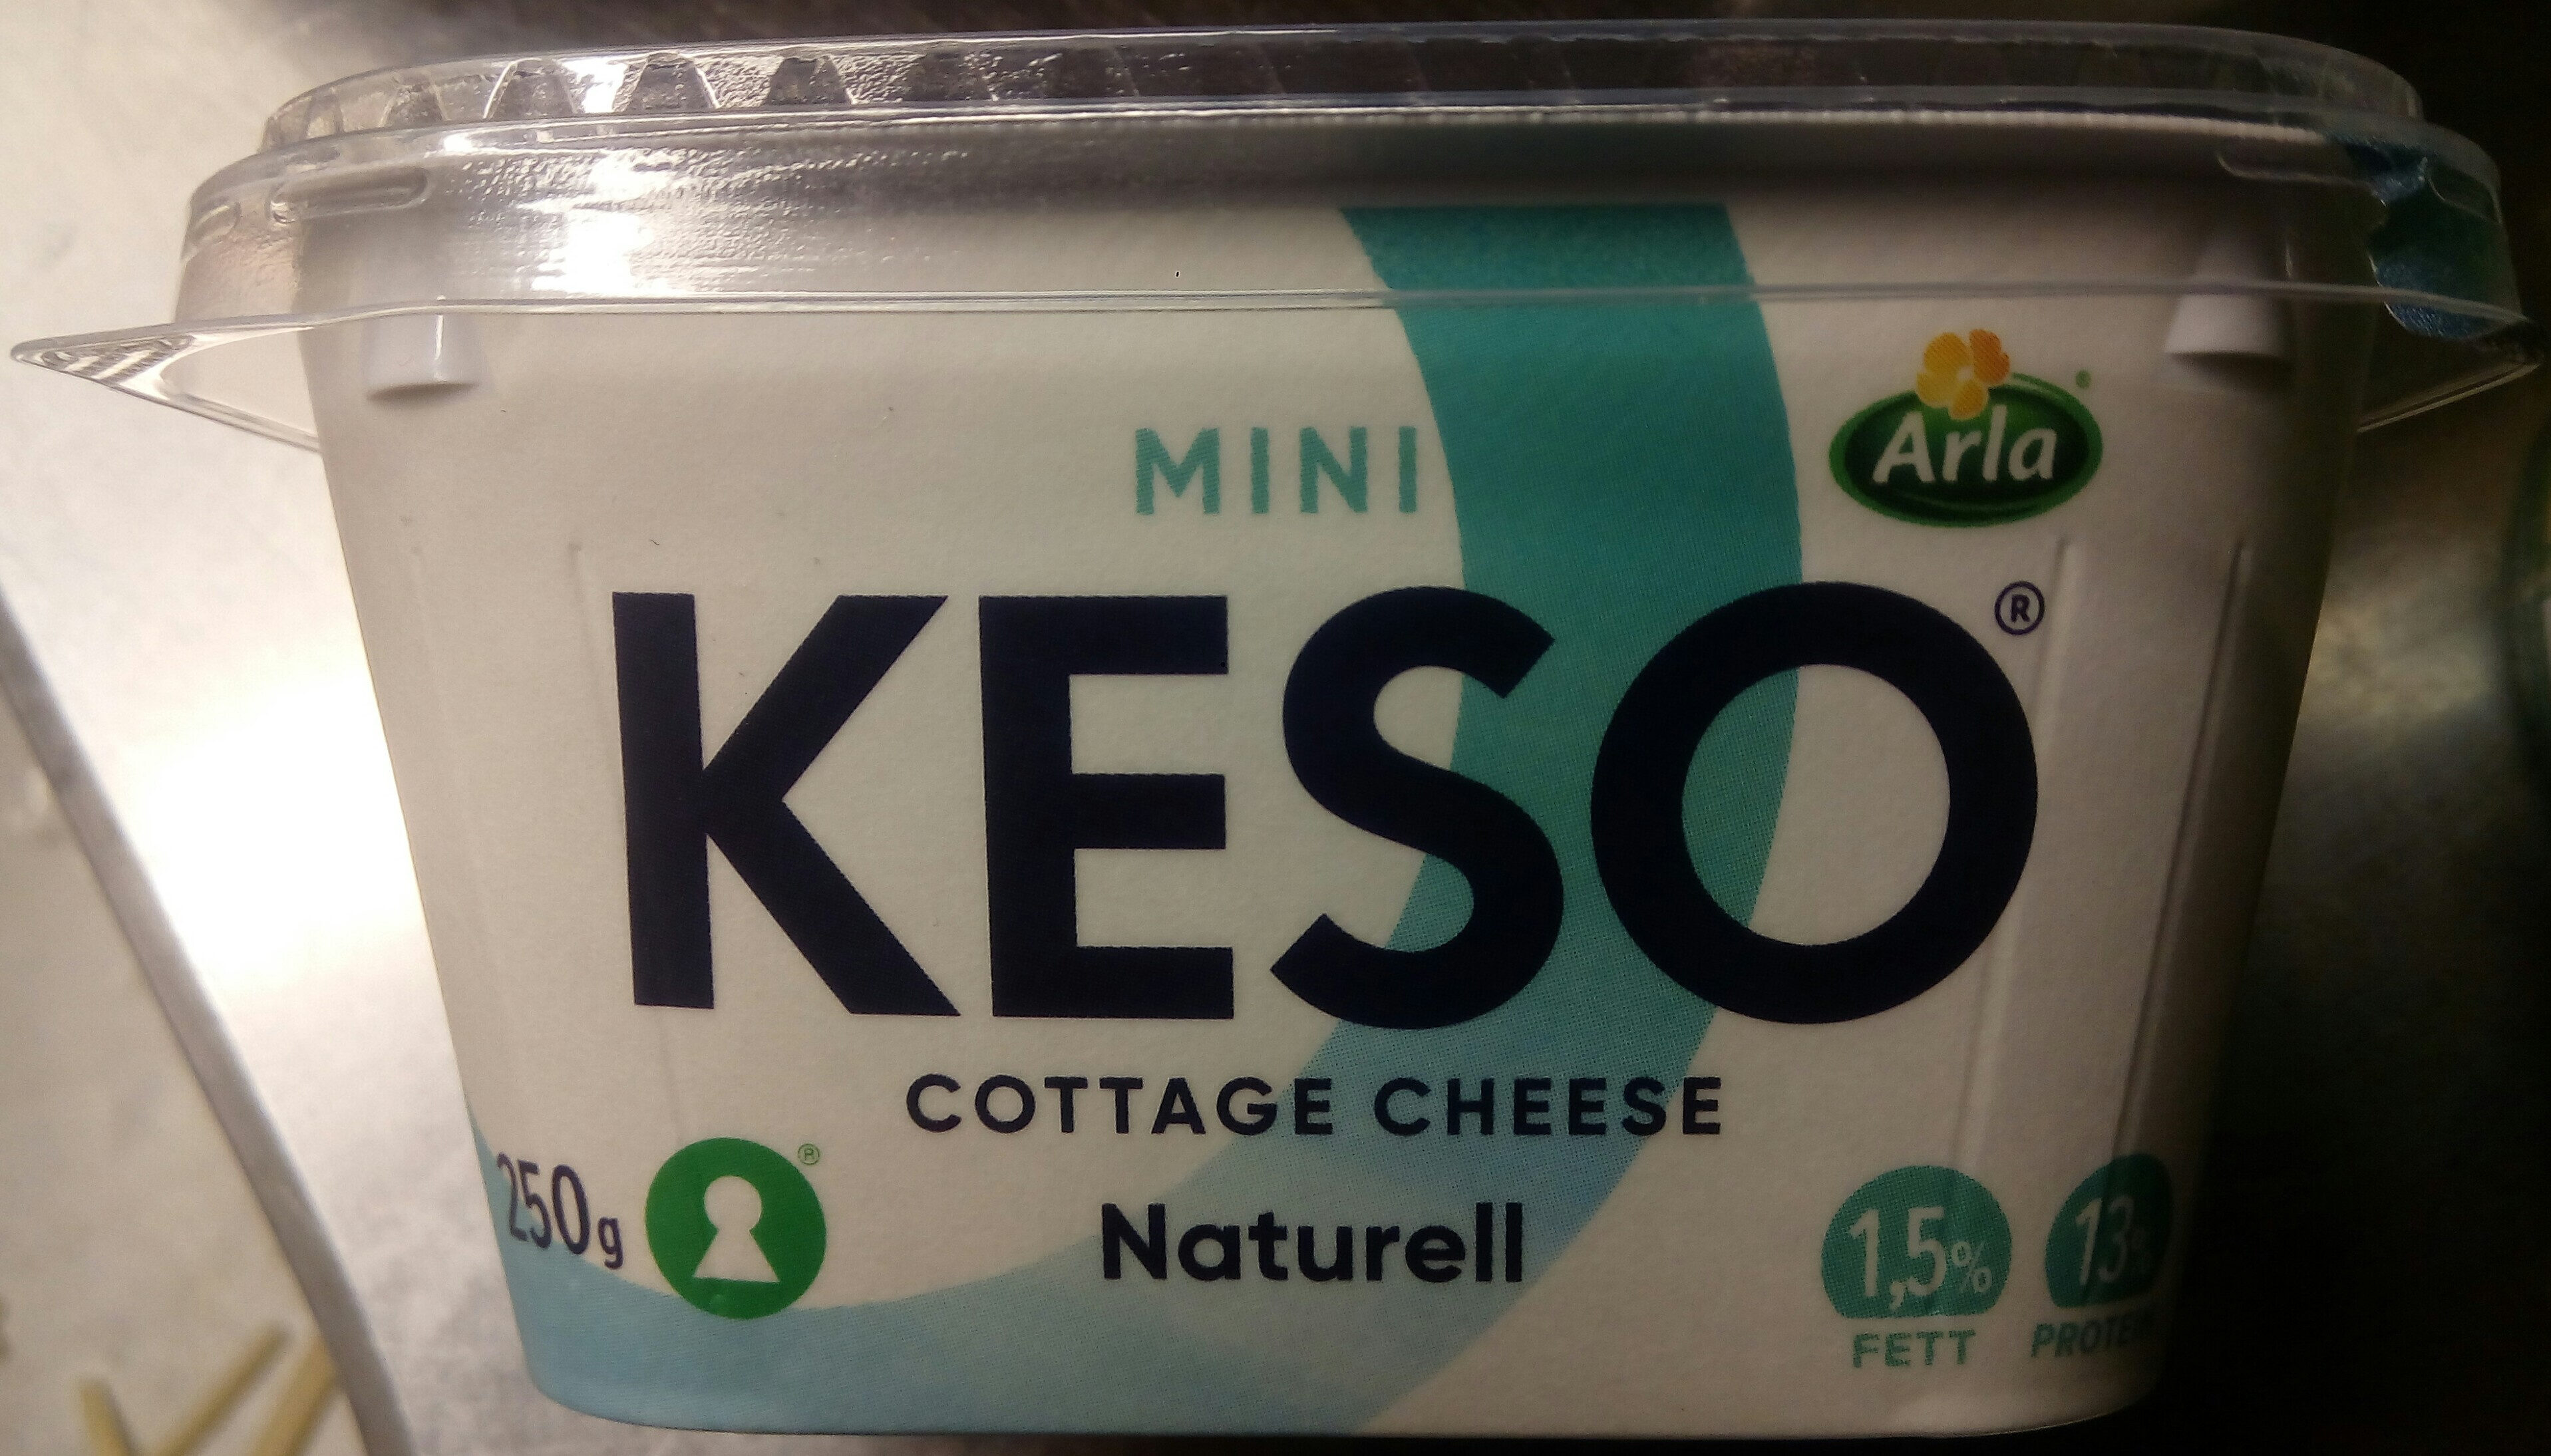 KESO Cottage Cheese Mini Naturell - Product - sv